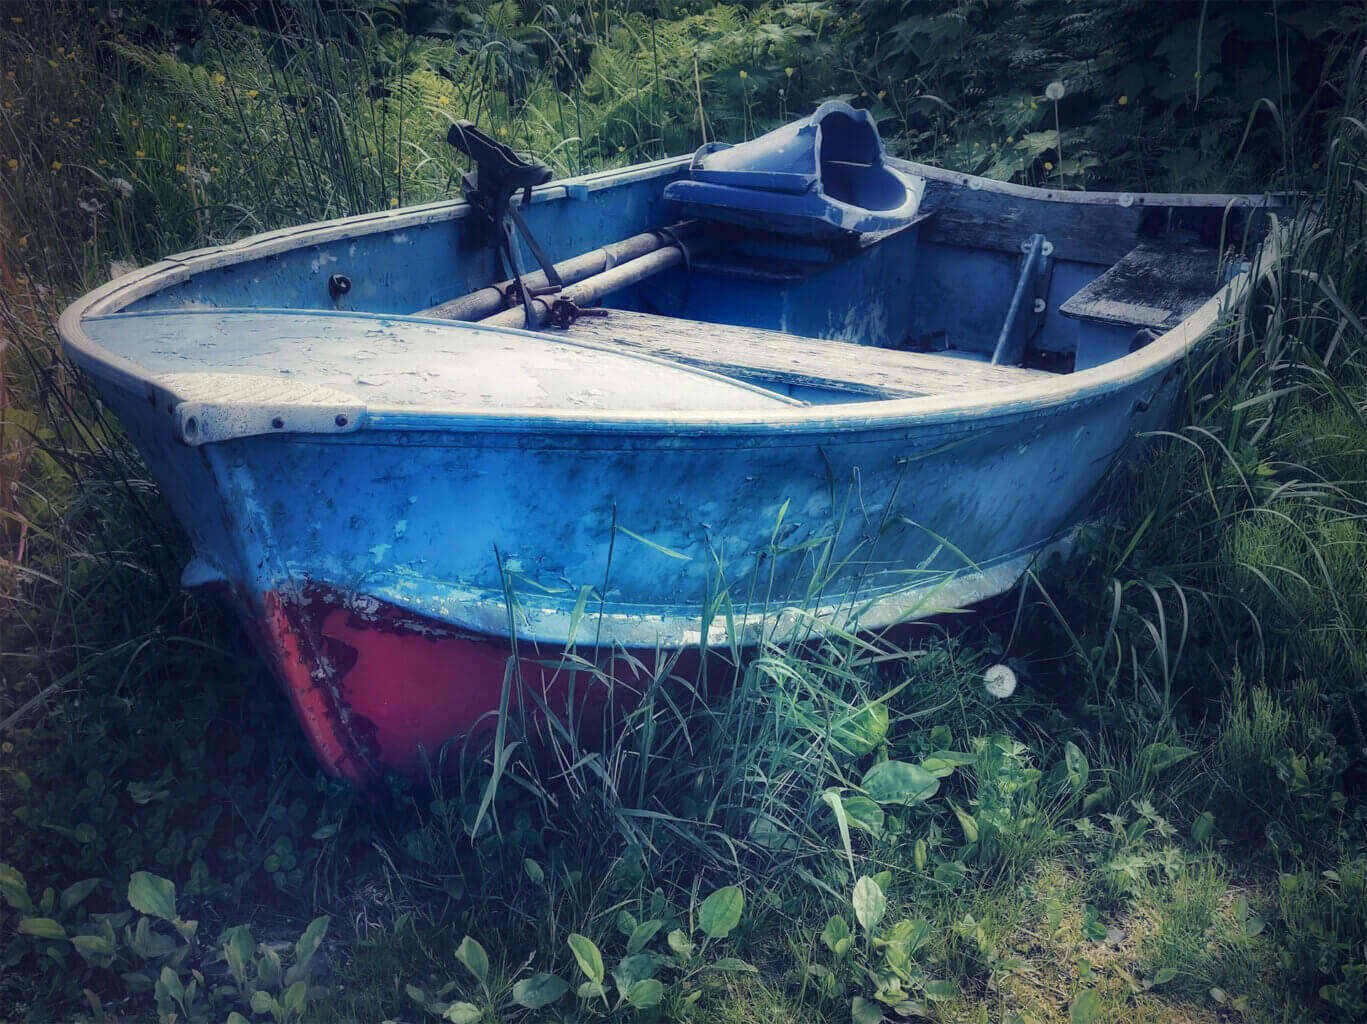 Photo of a small, aging, blue and red boat, sitting among weeds and tall grasses. The paint is peeling, and the photo has a soft, dreamy feeling.